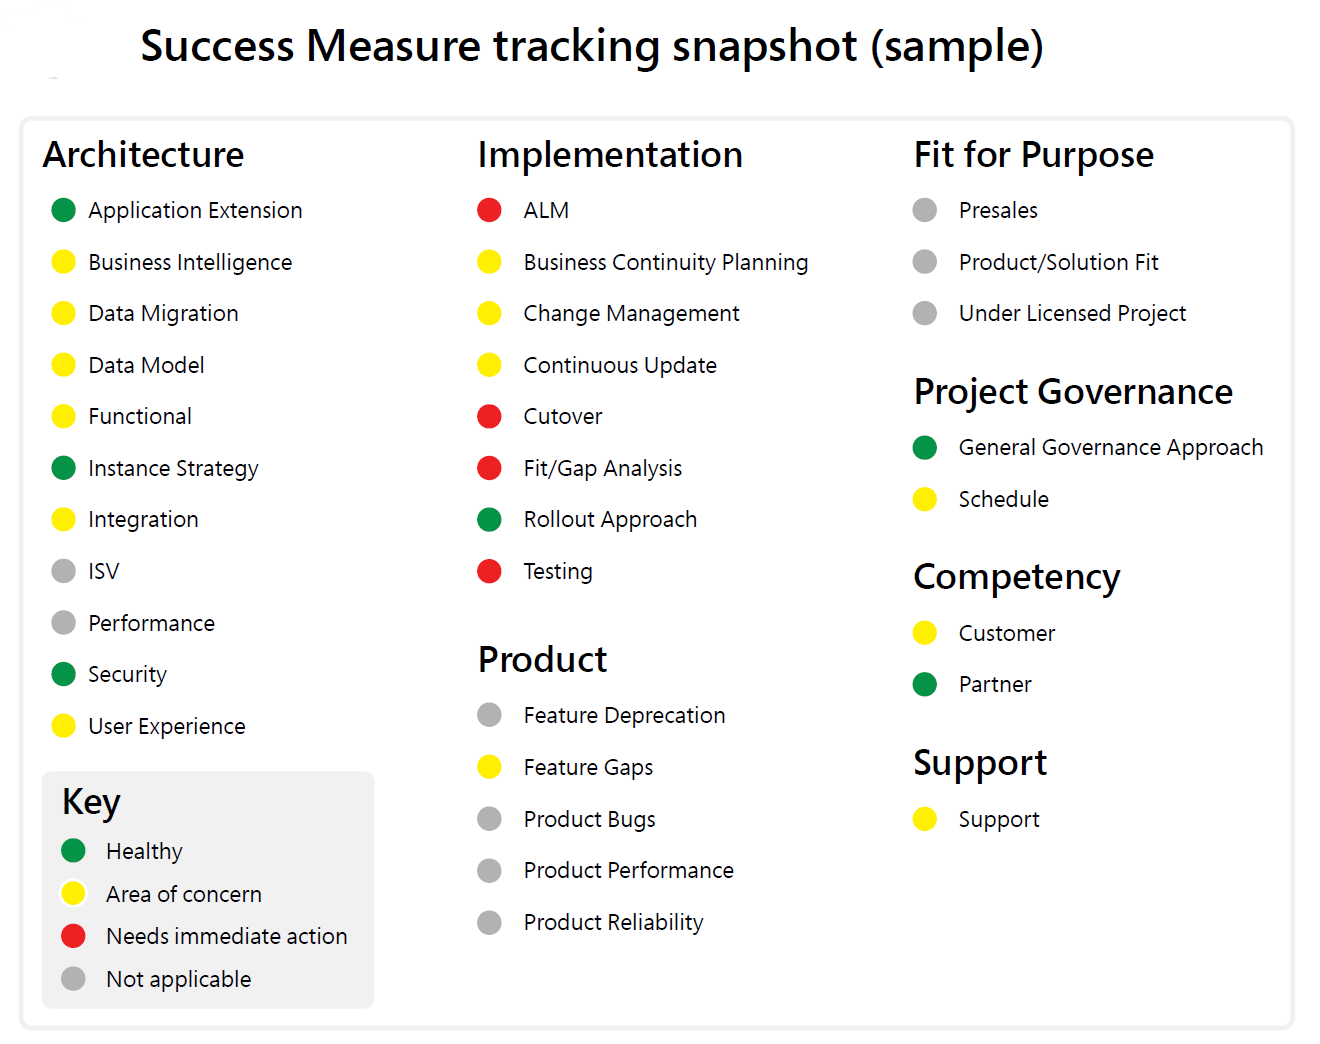 Illustrates how you can track success measures across architecture, key areas, implementation, product features, fit for purpose, project governance, competency, and support.